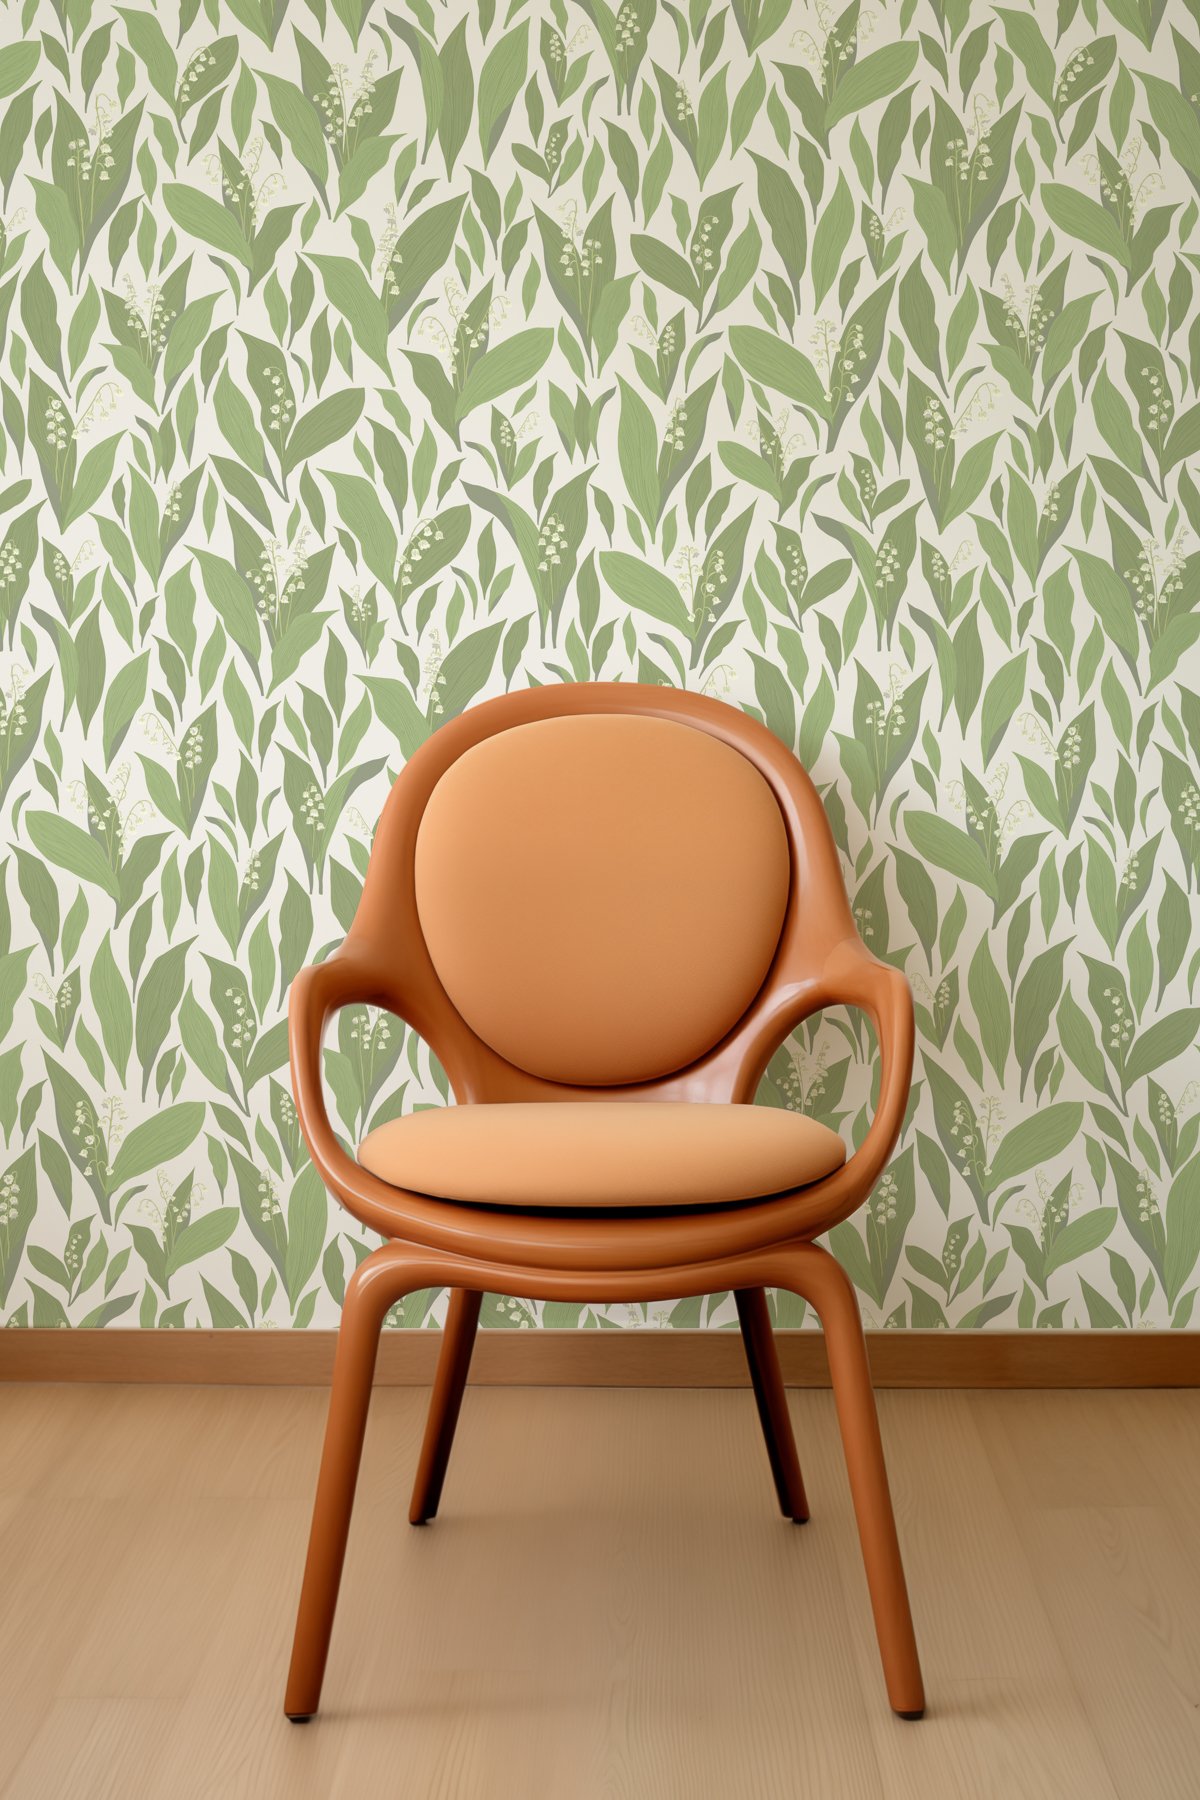 Kate Golding Lily of the Valley Wallpaper.  Modern wallcoverings and interior decor. 